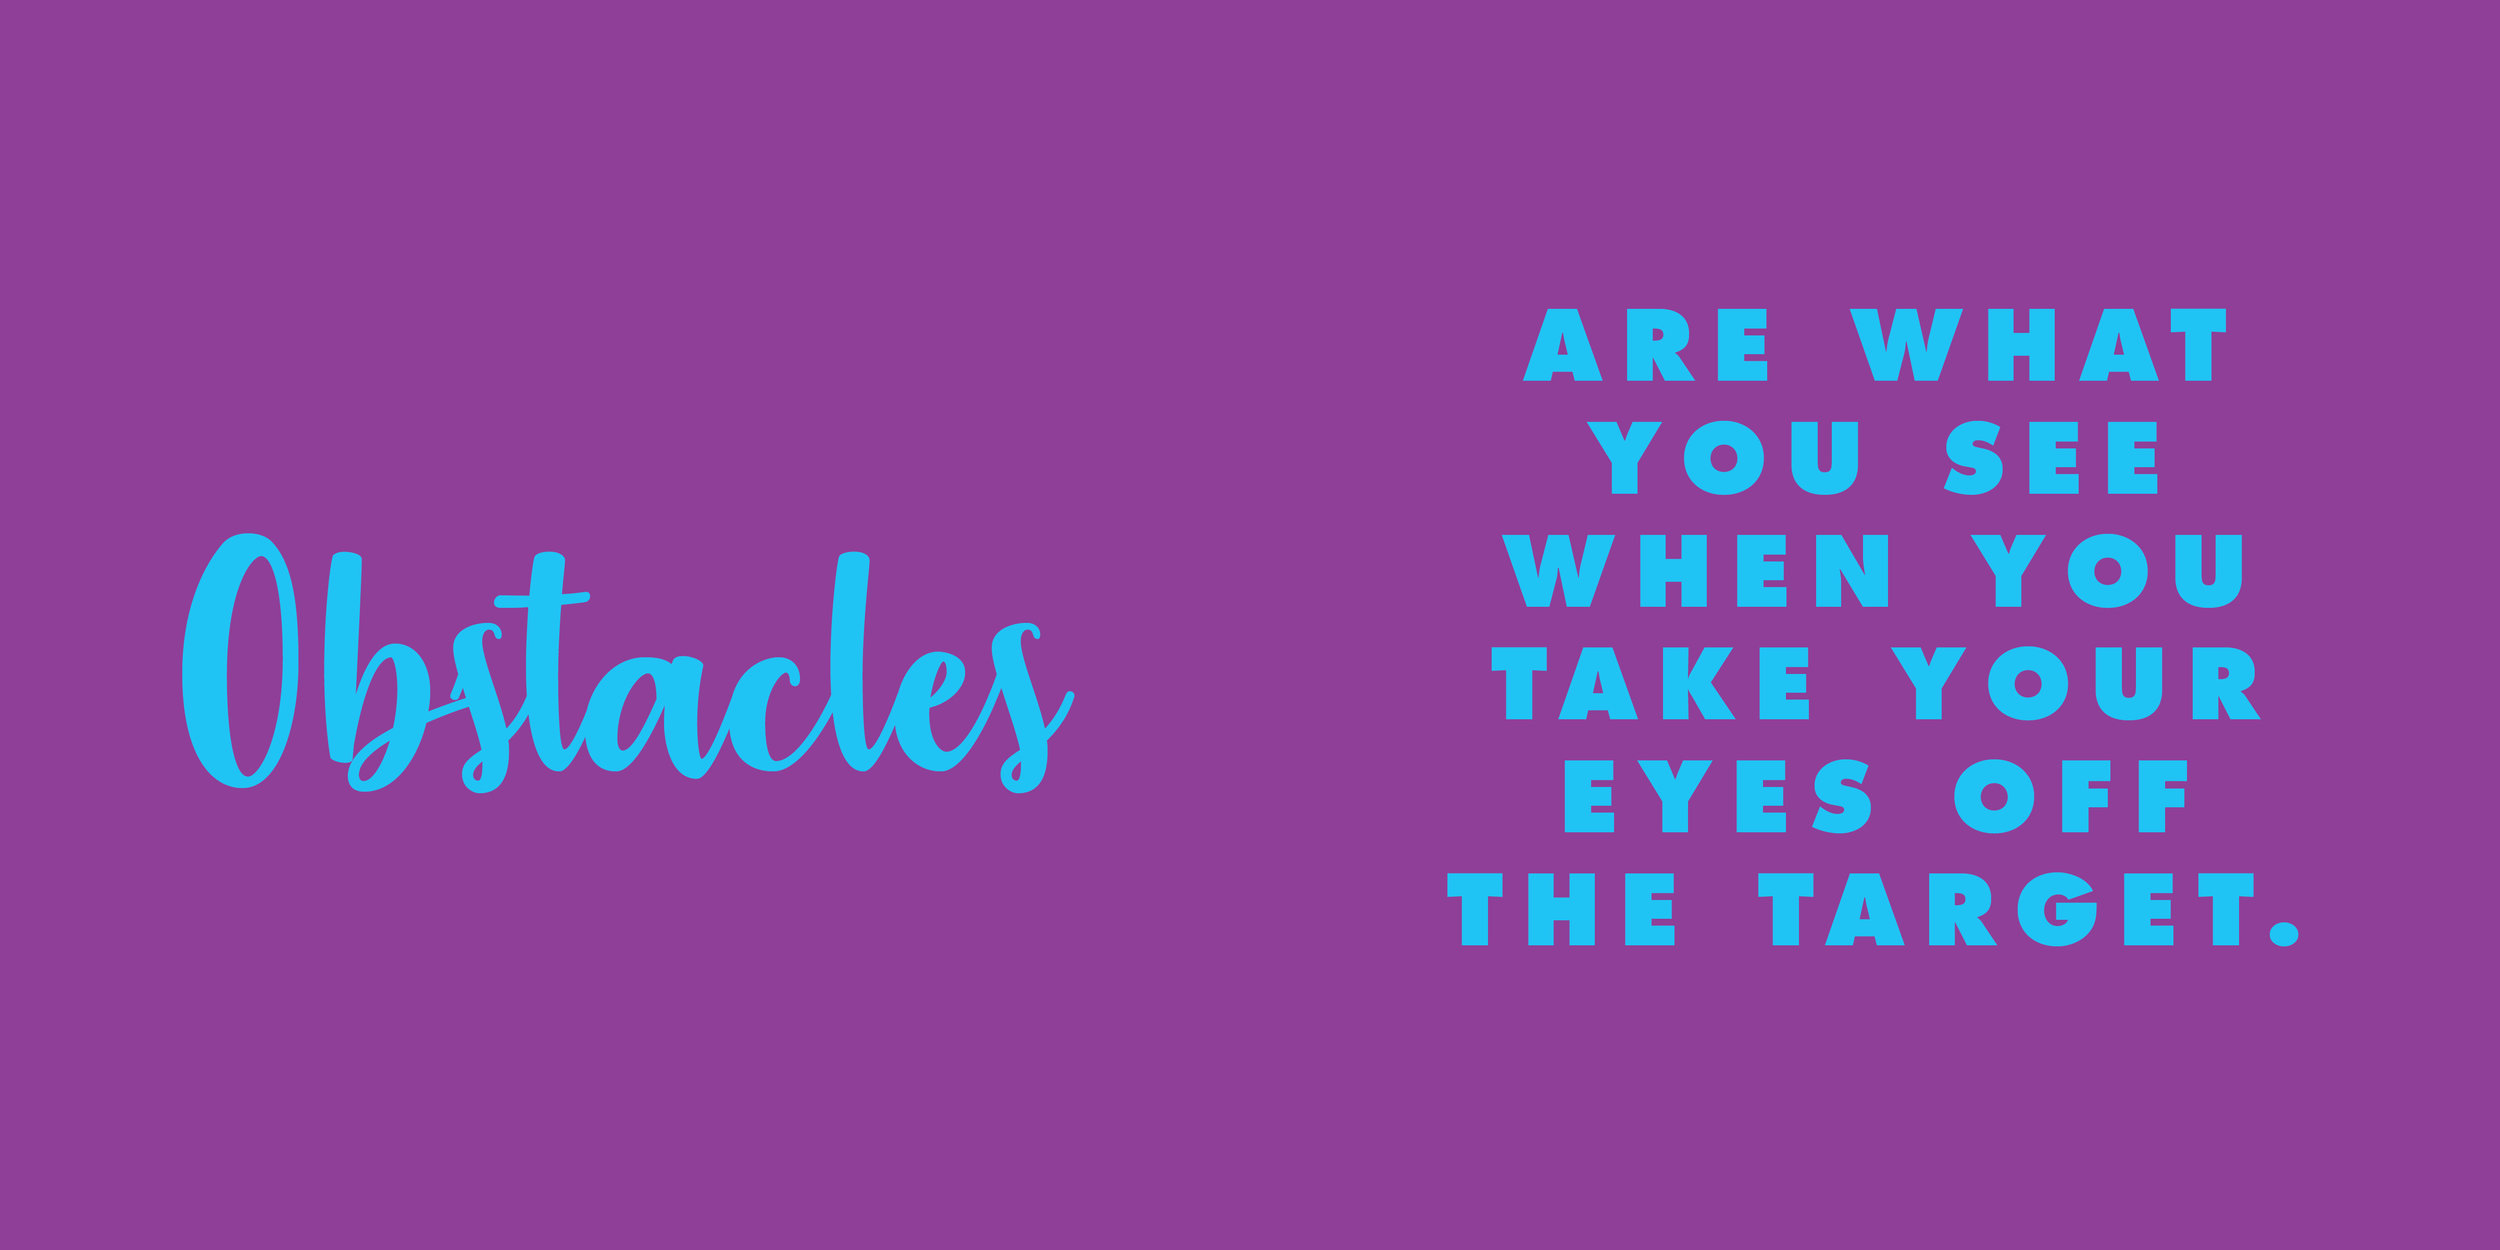 Book quote: Obstacles are what you see when you take your eyes off the target.